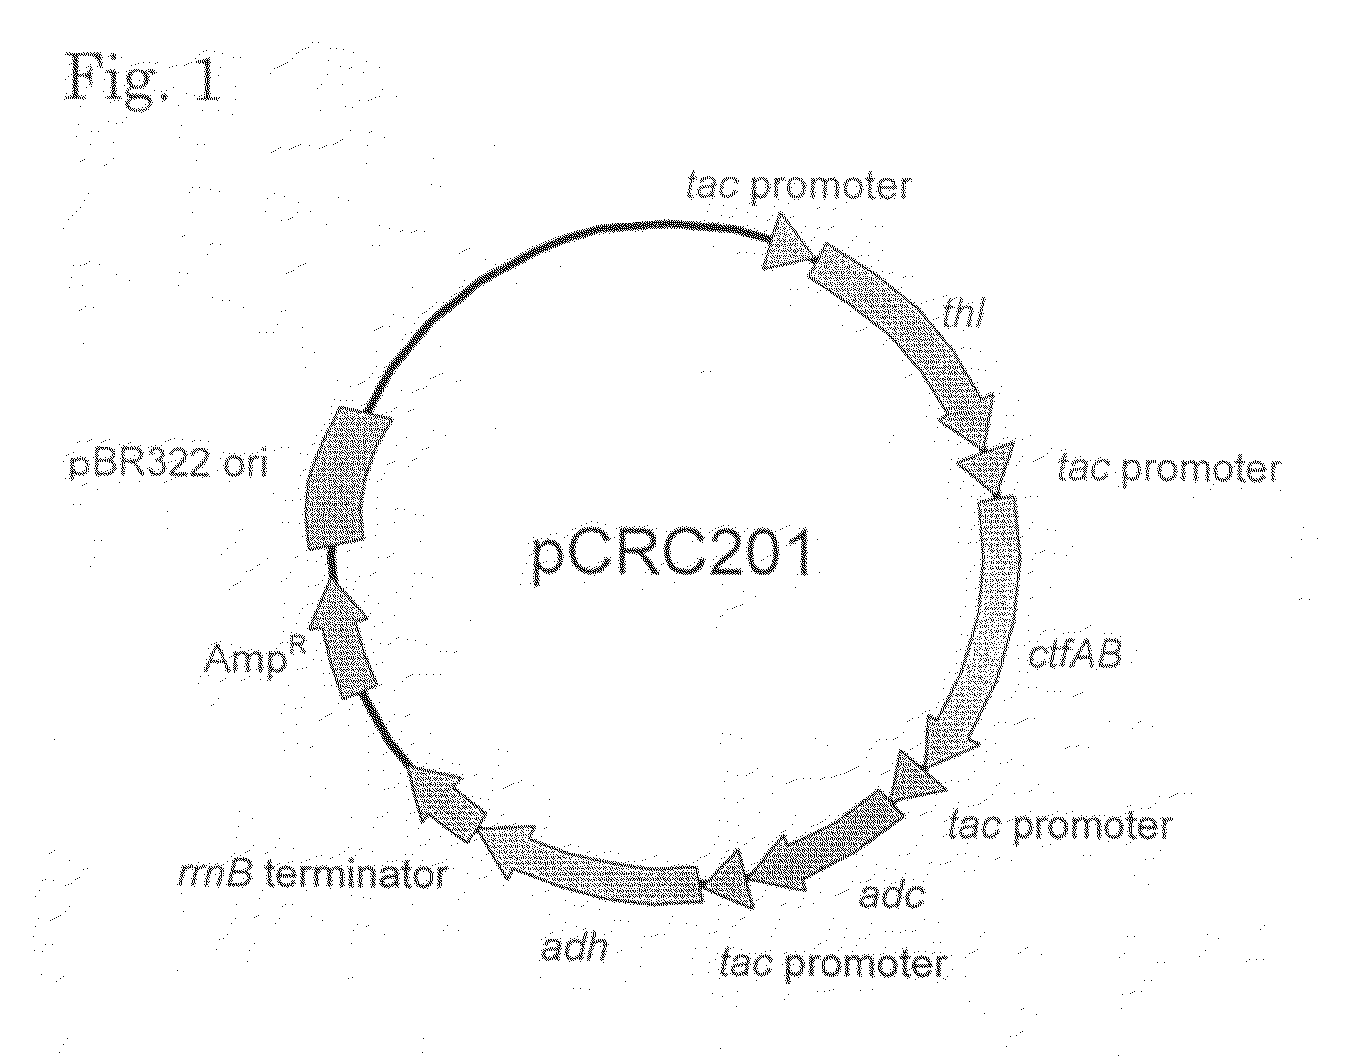 Transformant capable of producing isopropanol